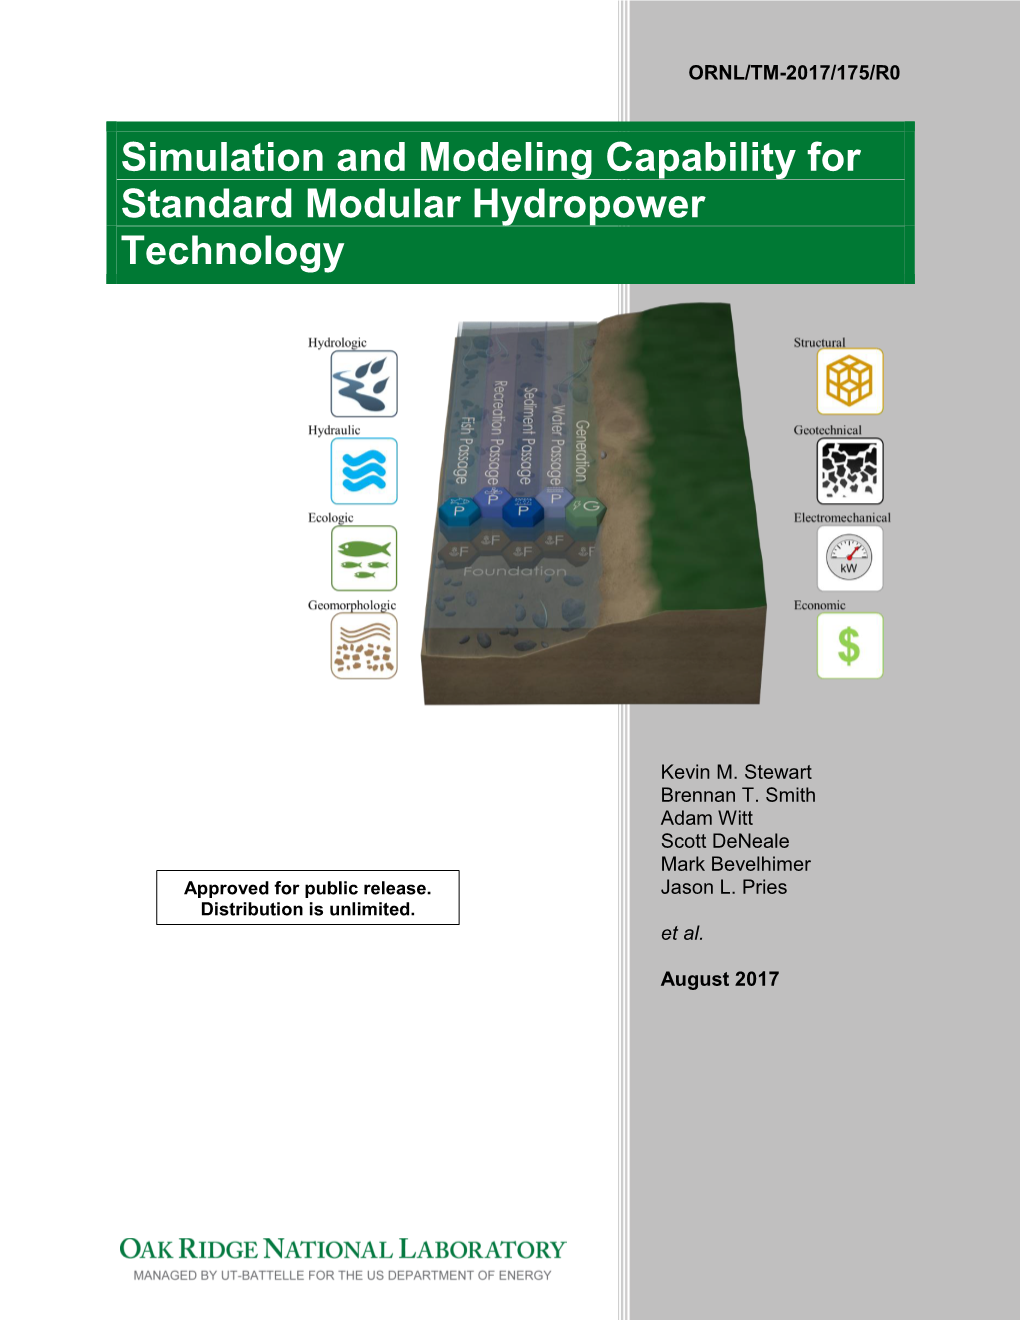 Simulation and Modeling Capability for Standard Modular Hydropower Technology